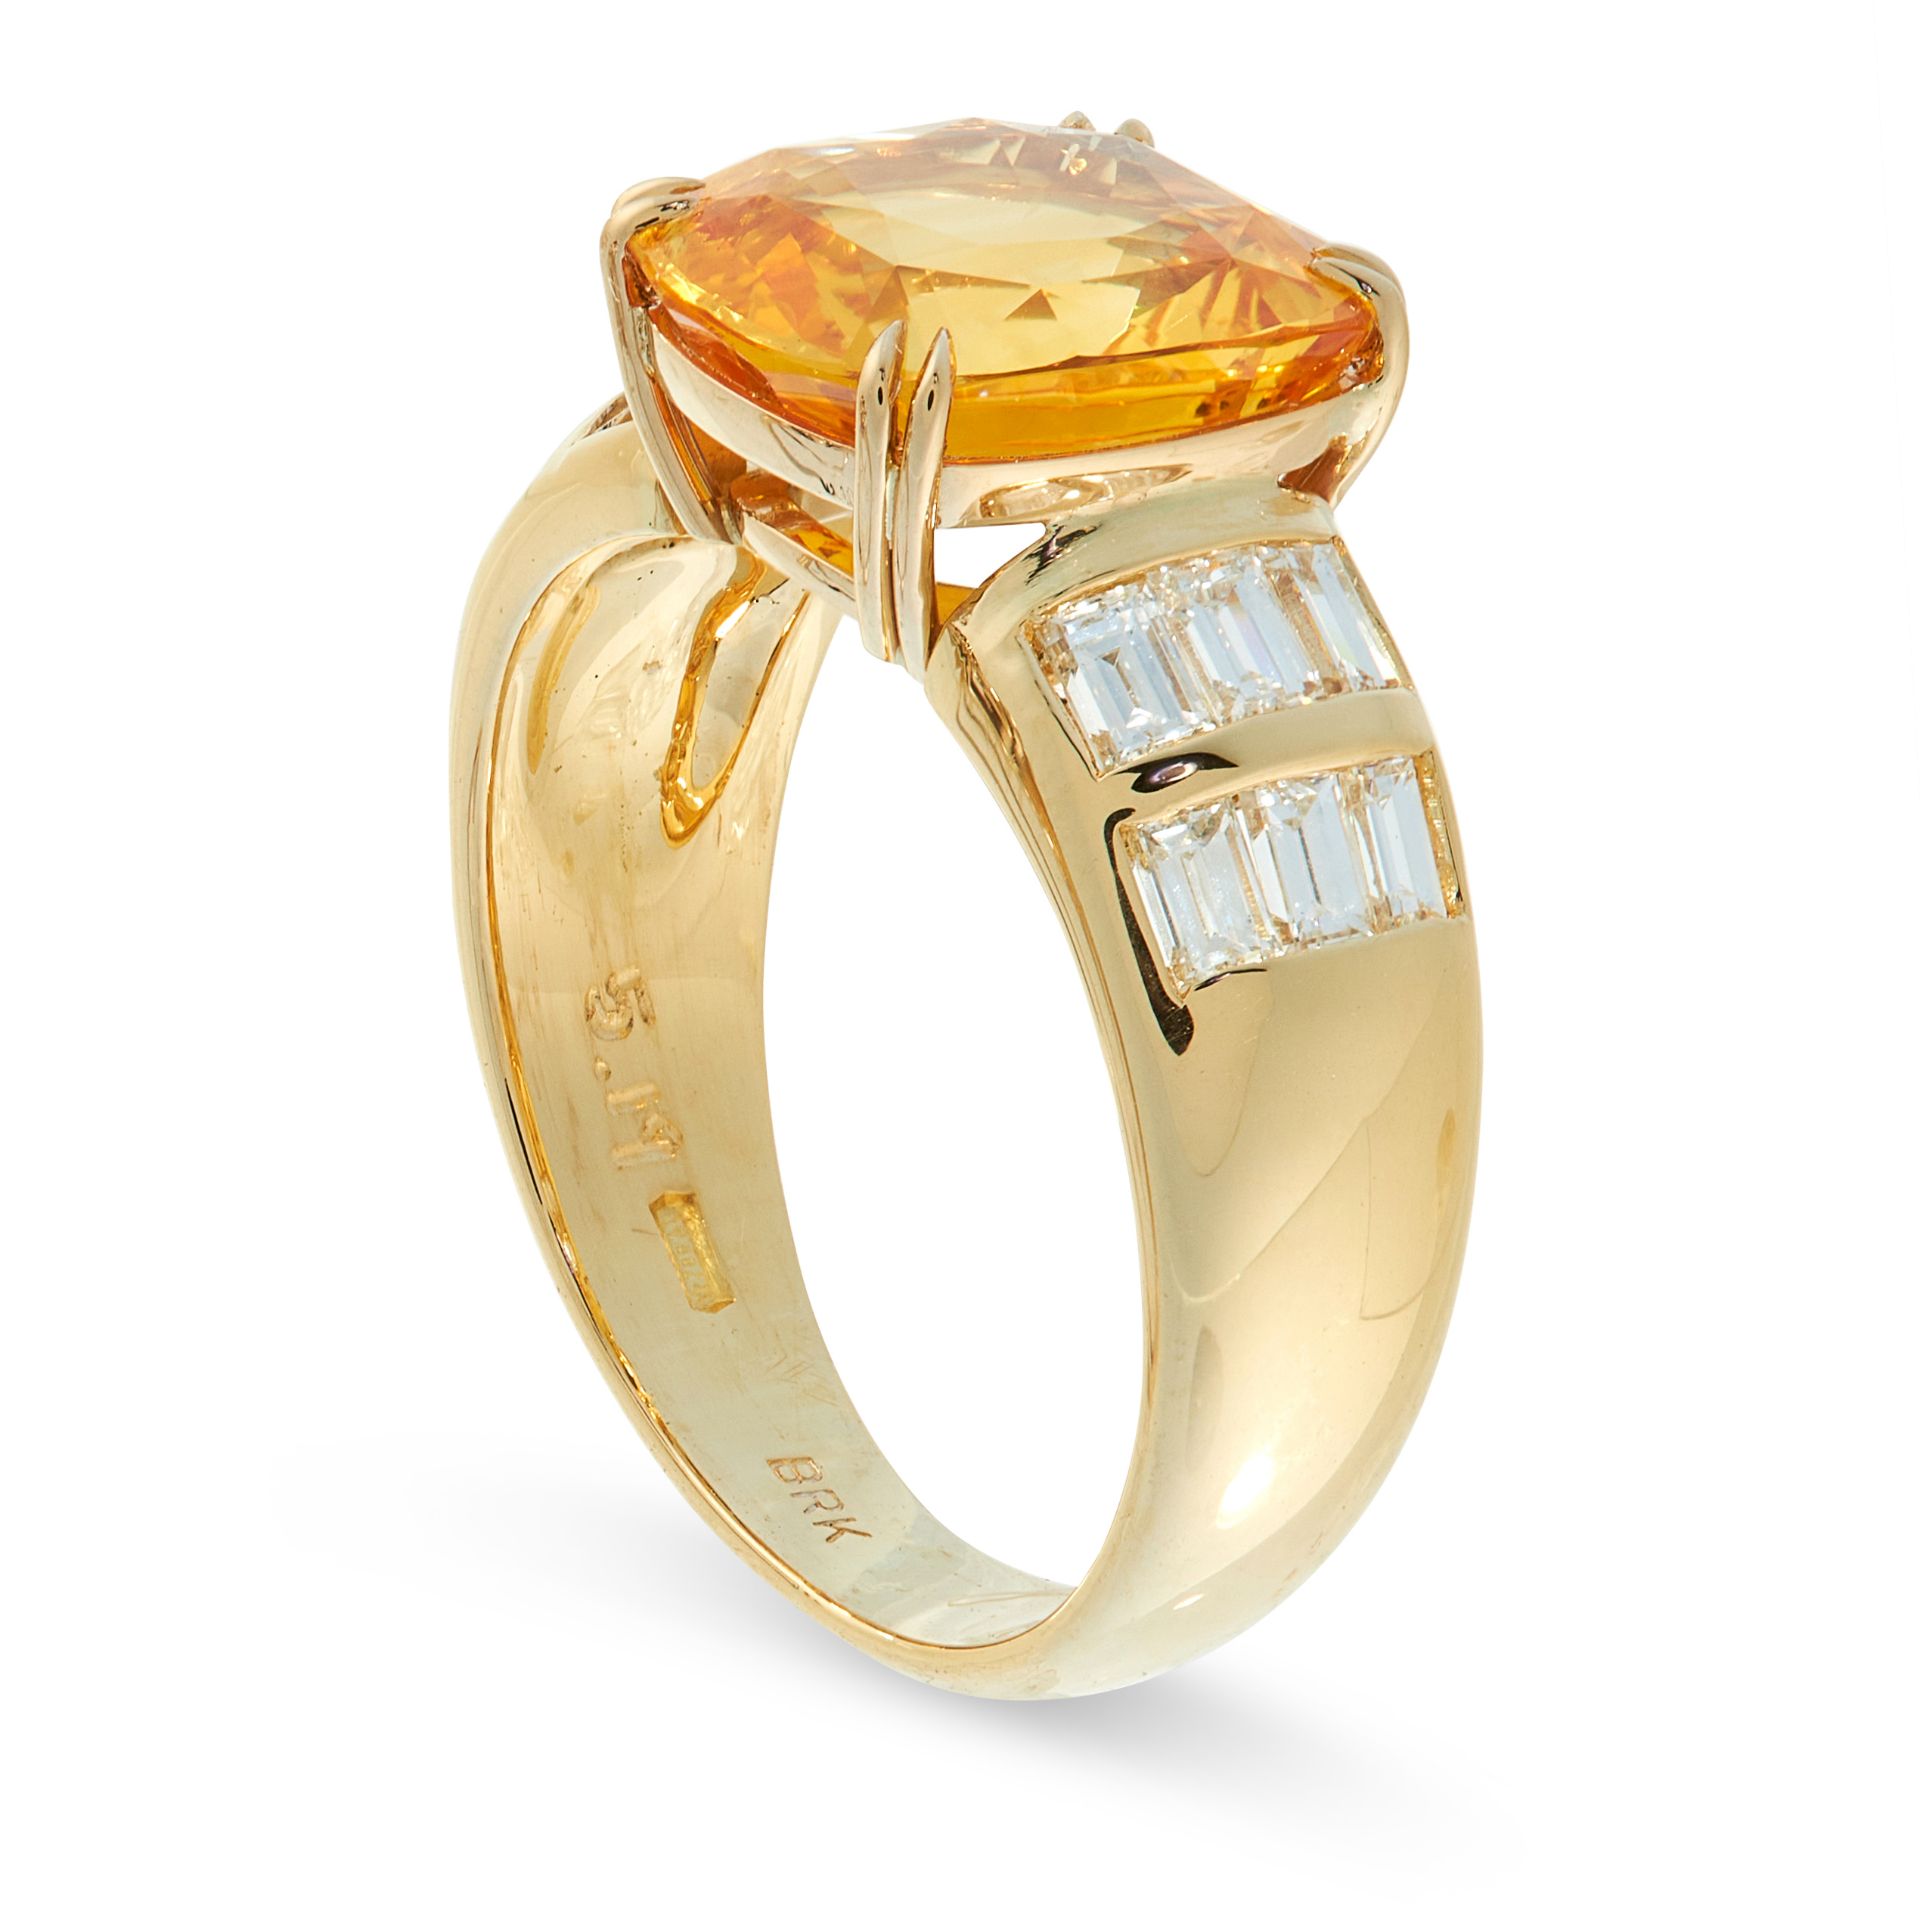 YELLOW SAPPHIRE AND DIAMOND RING set with a cushion cut yellow sapphire of 5.19 carats and rows of - Bild 2 aus 2